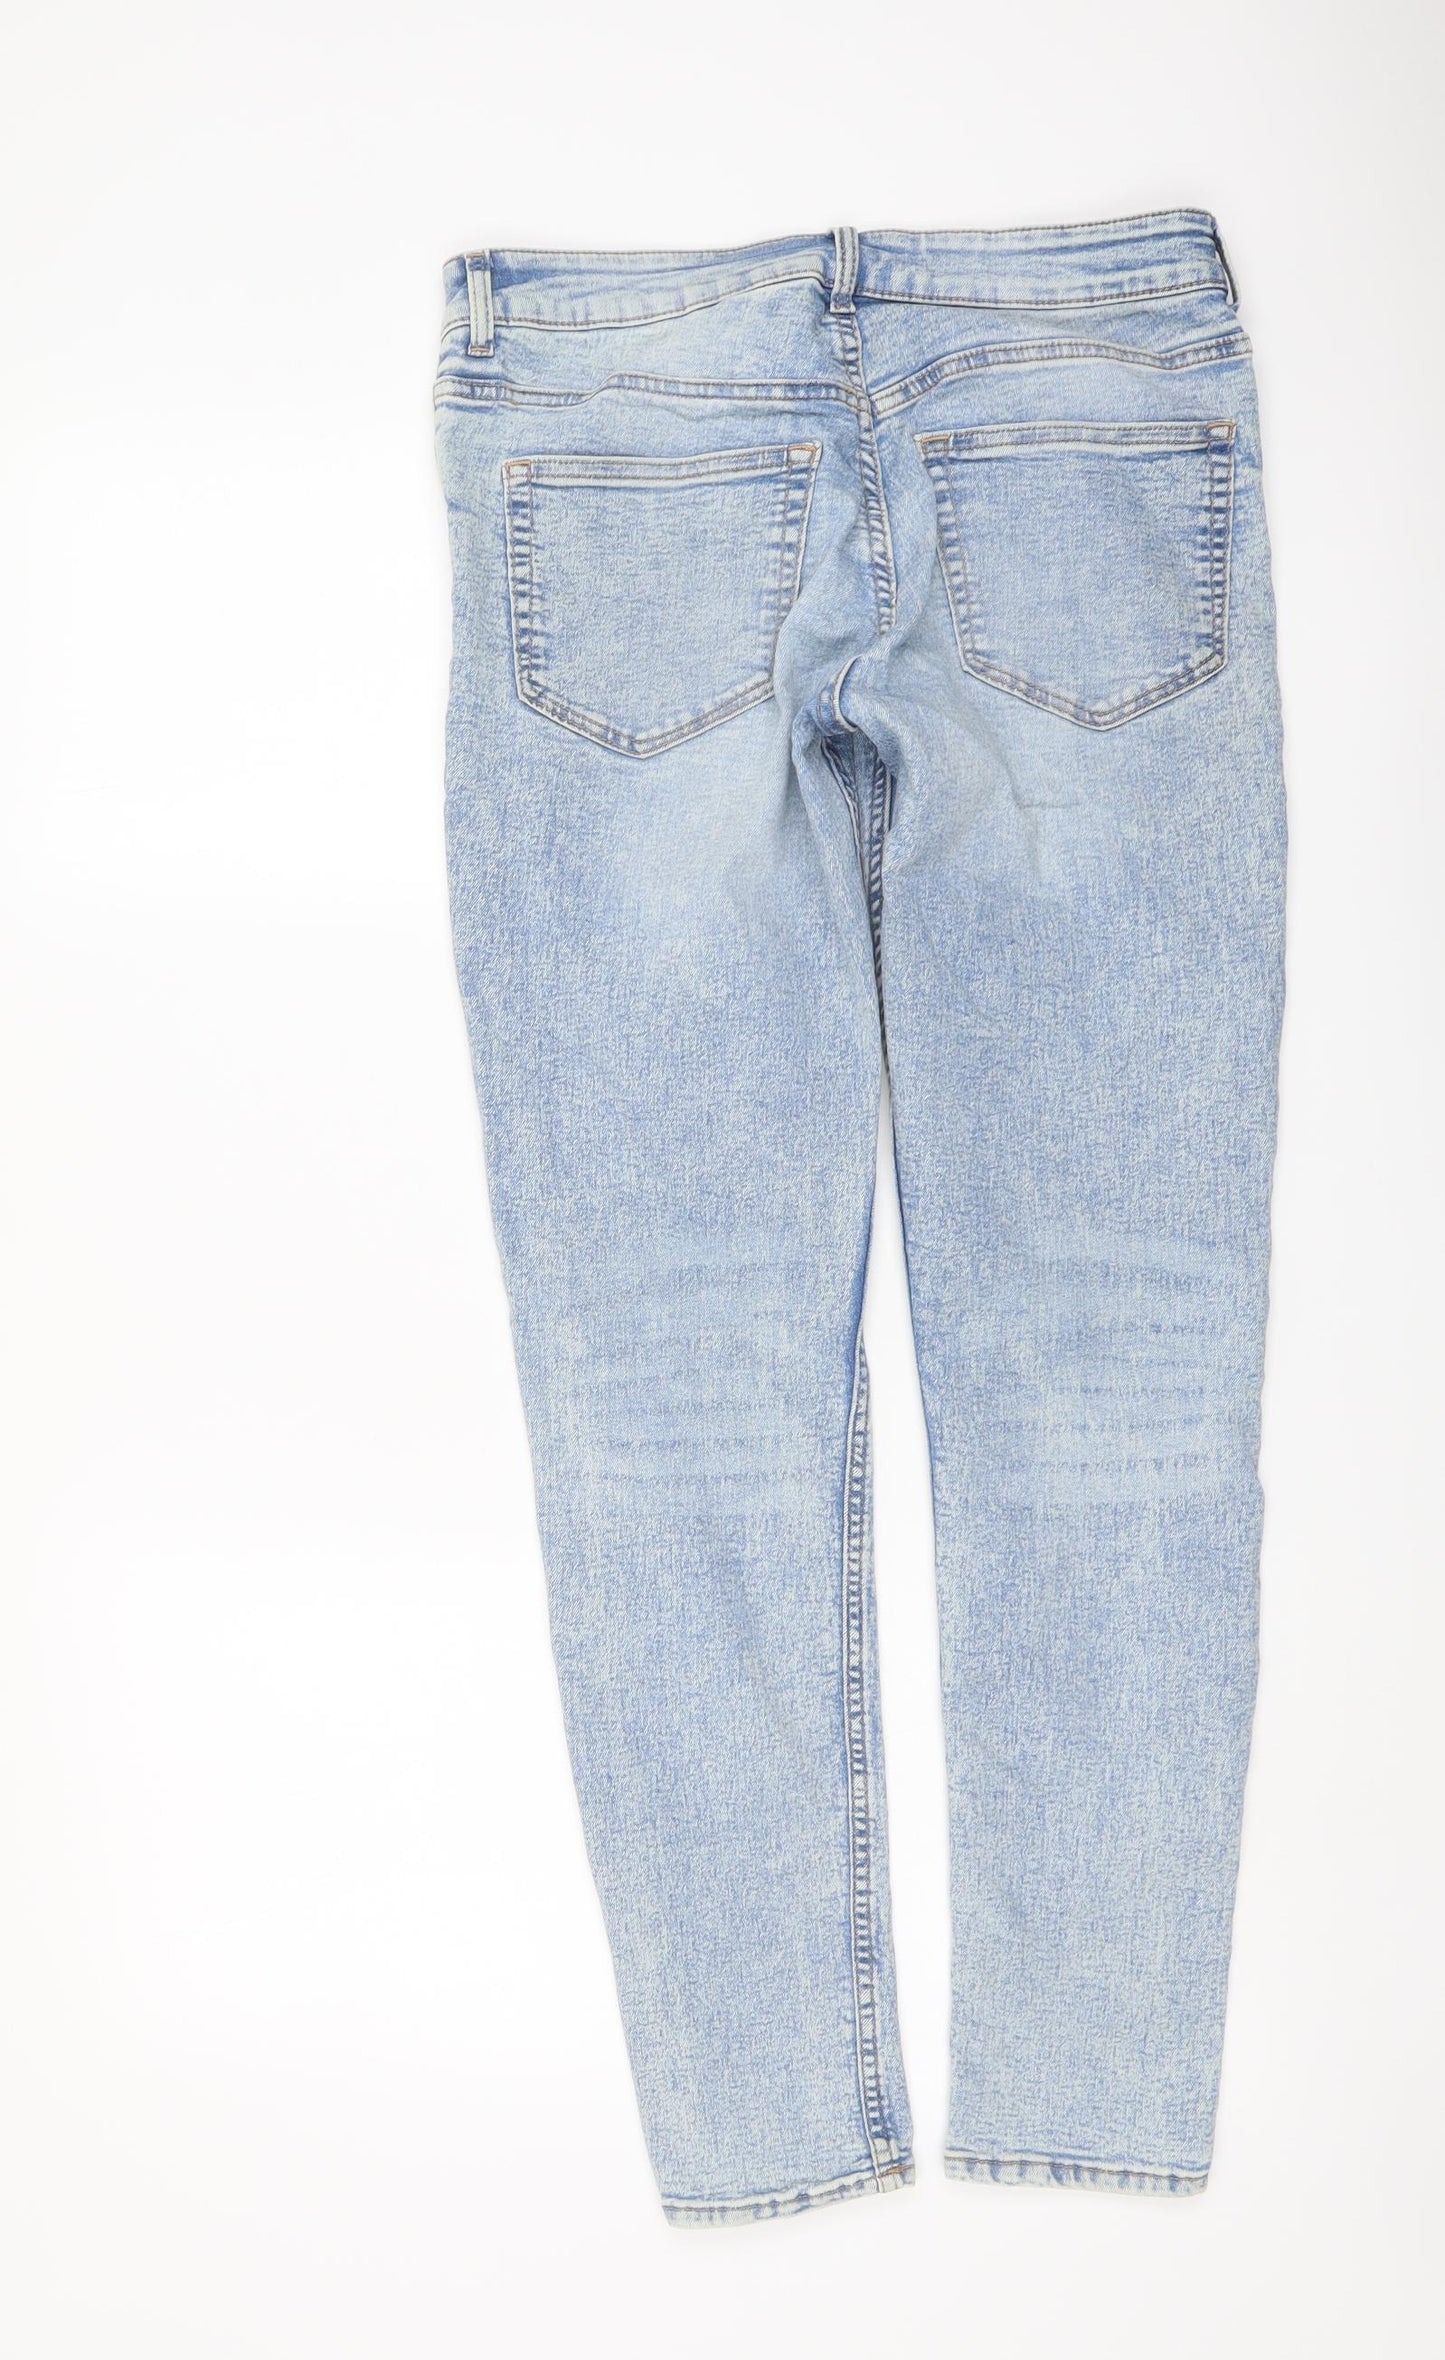 H&M Womens Blue Cotton Skinny Jeans Size 12 L29 in Regular Button